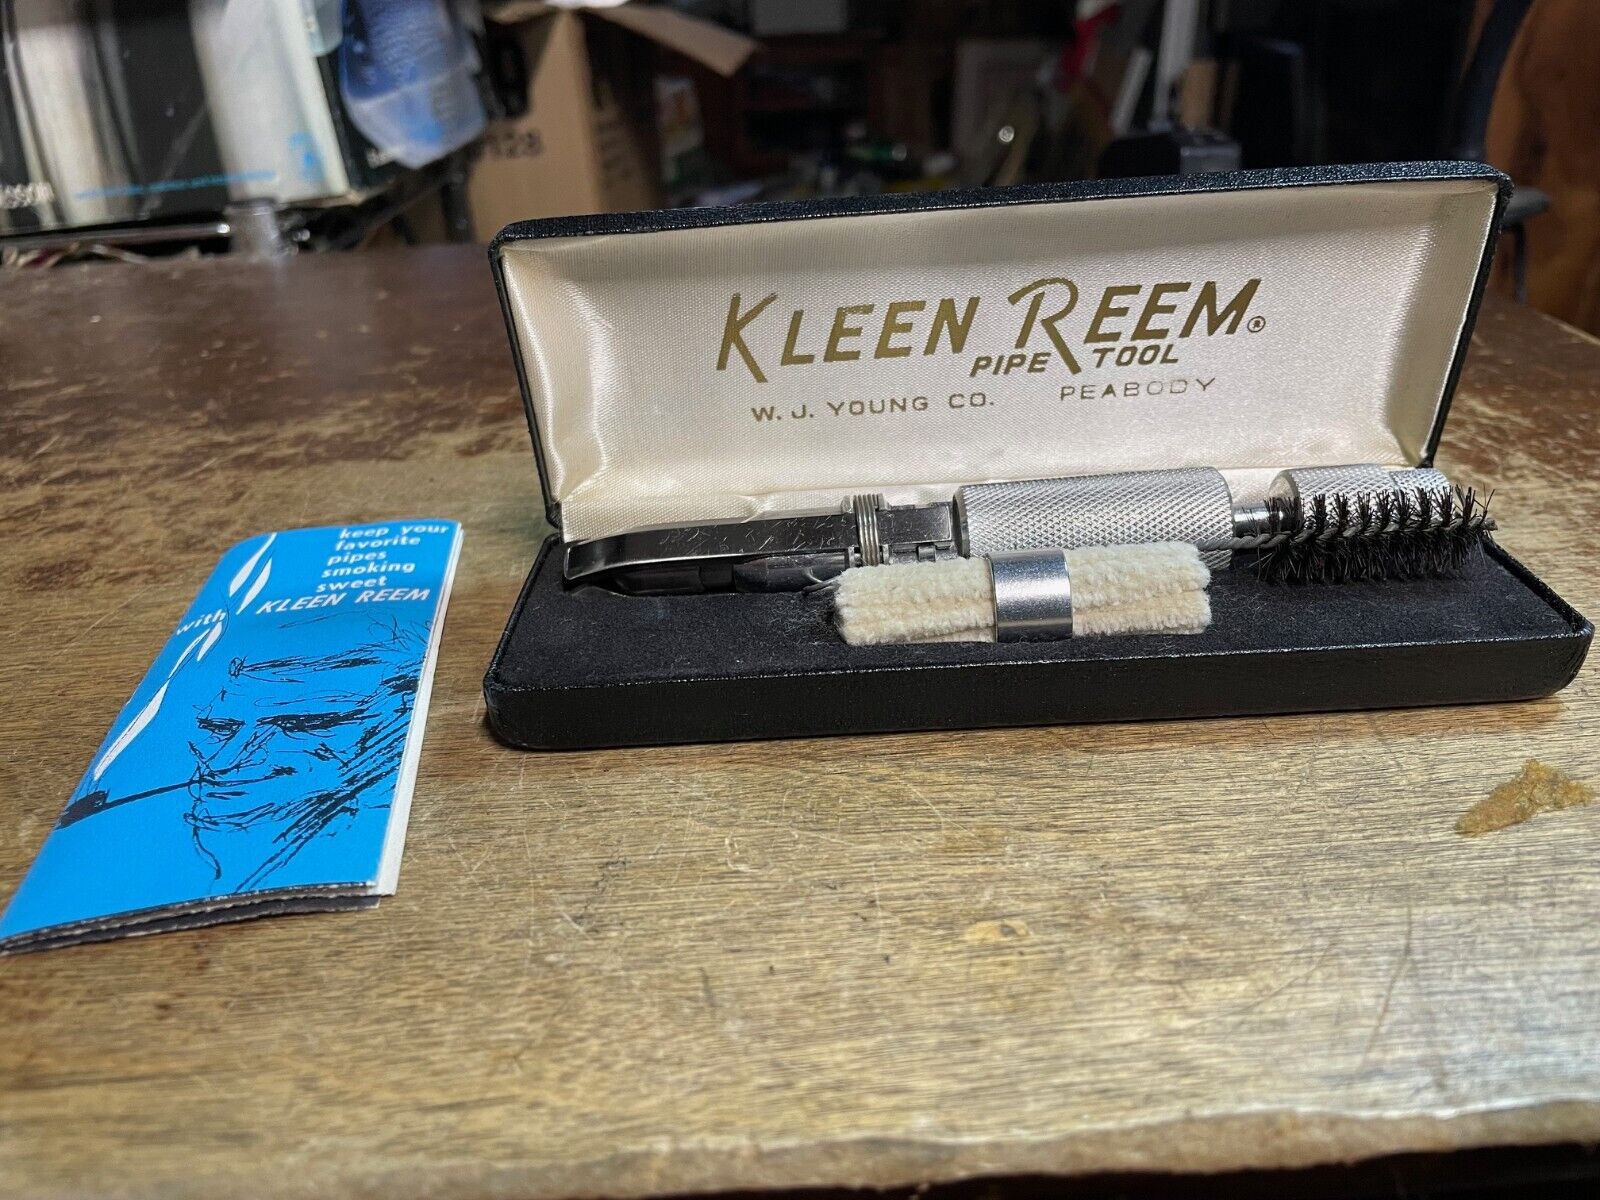 Vintage KLEEN REEM PIPE CLEANING TOOL Unused w/ Case W.J. YOUNG CO. PEABODY MASS